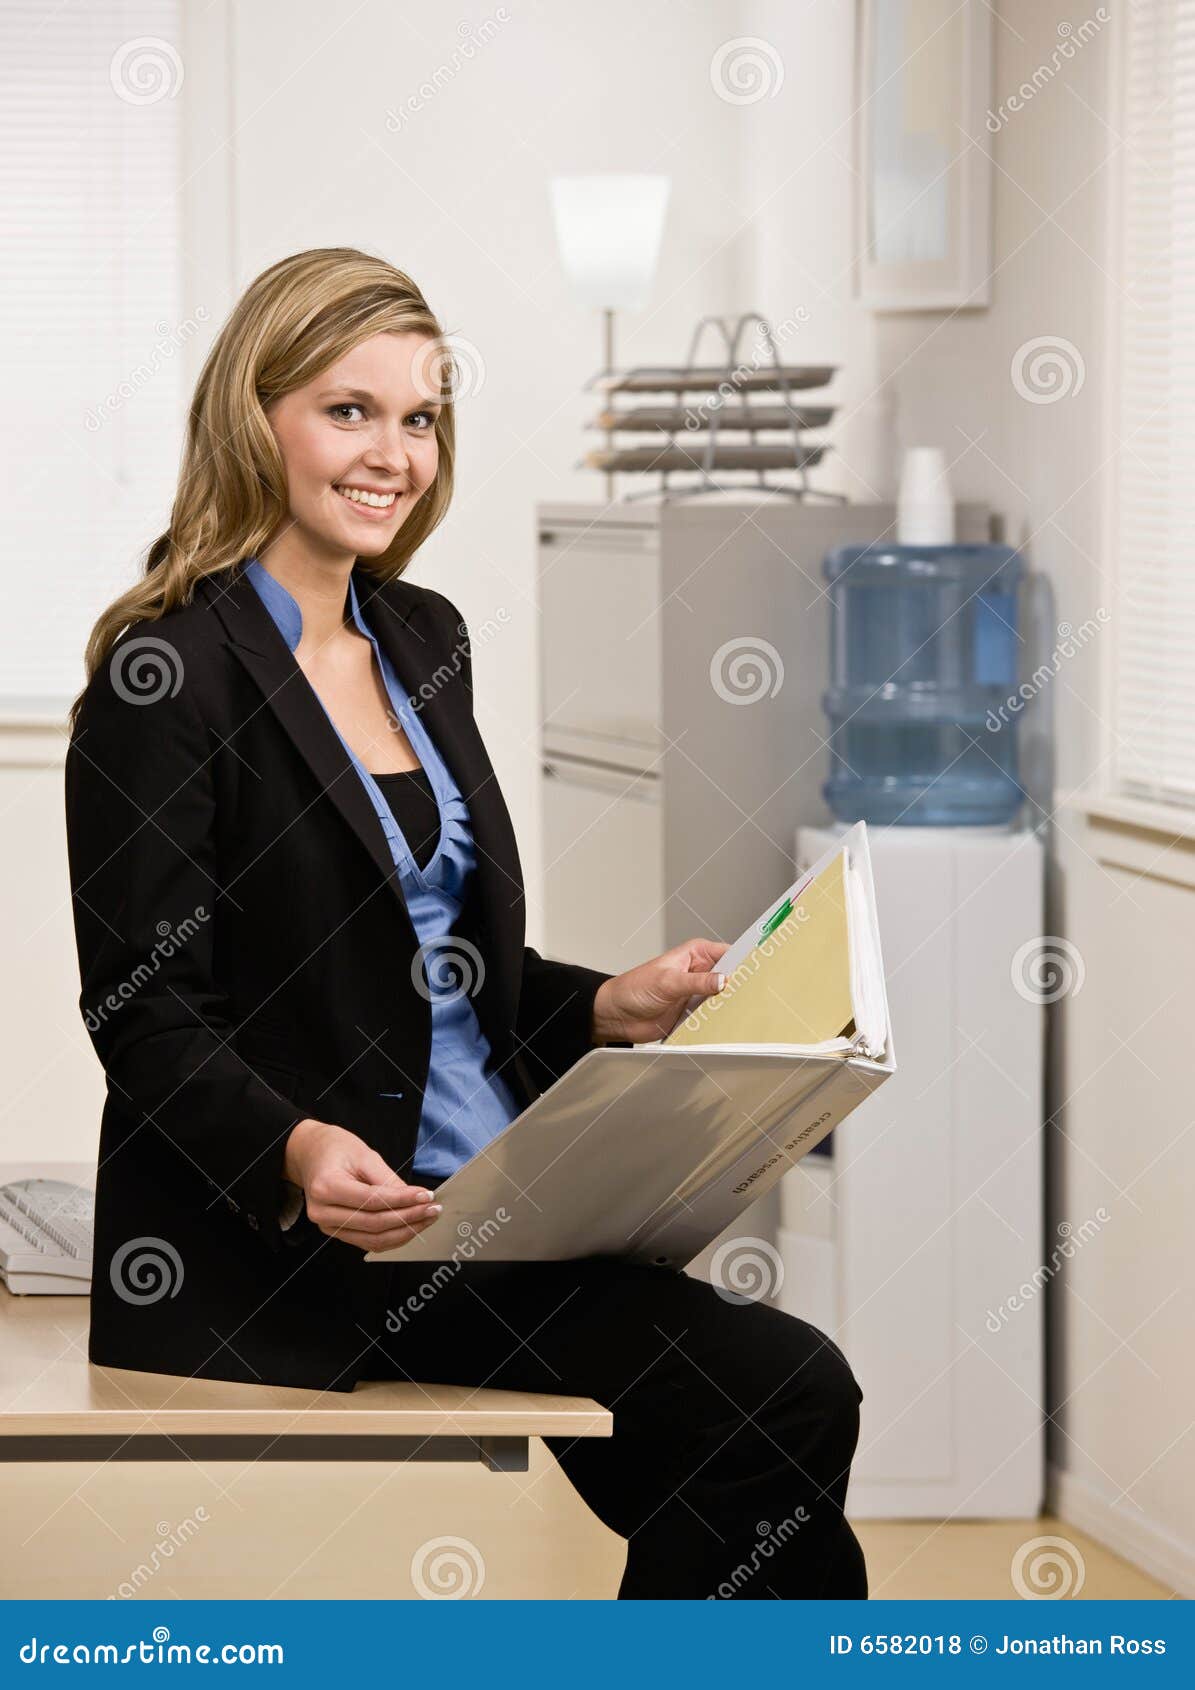 Confident business woman sitting at desk stock photo (135604